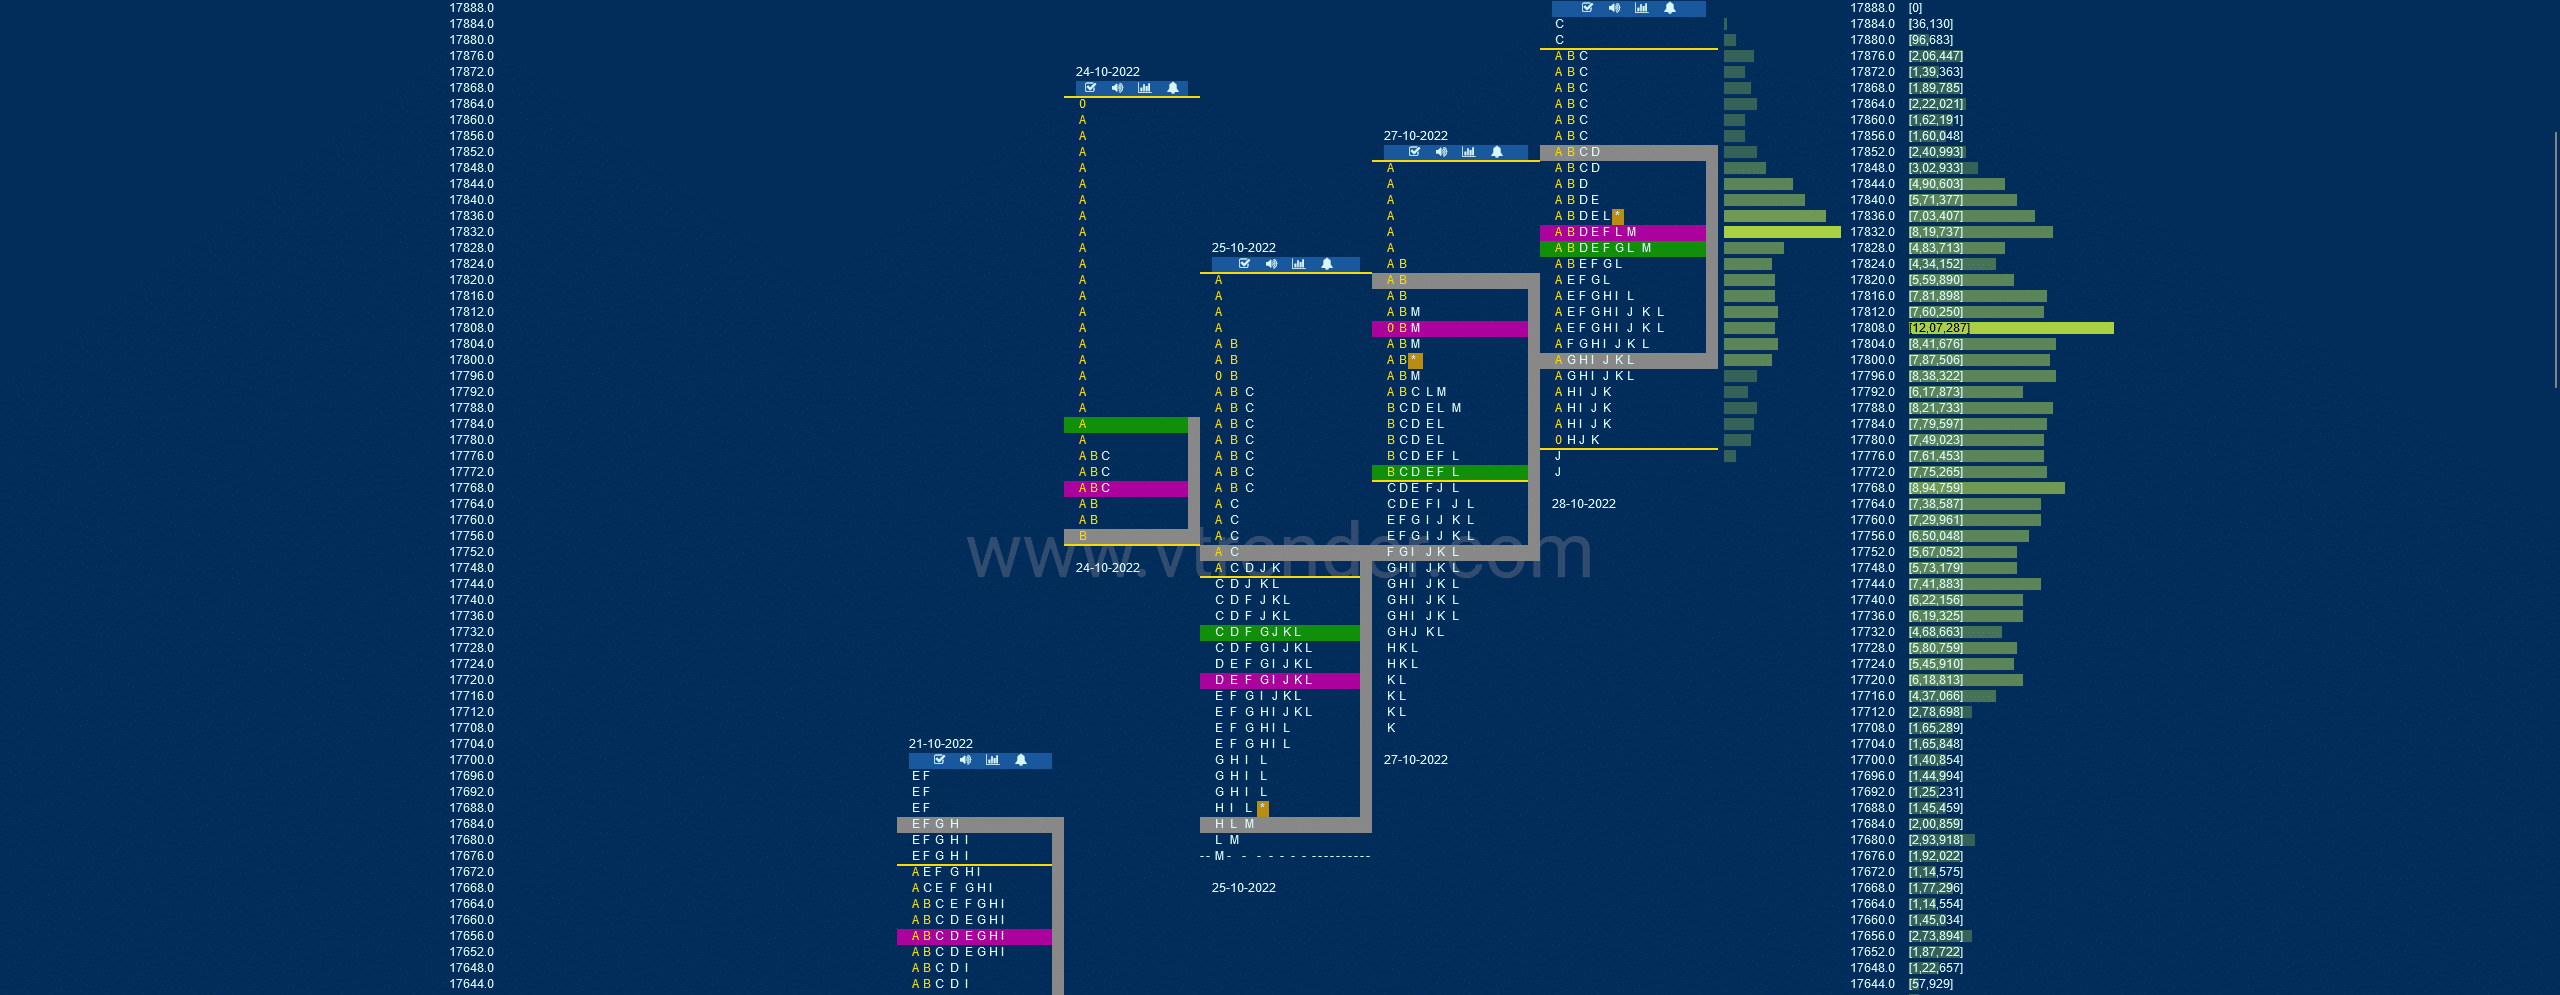 Nf 17 Market Profile Analysis Dated 28Th Oct 2022 Banknifty Futures, Charts, Day Trading, Intraday Trading, Intraday Trading Strategies, Market Profile, Market Profile Trading Strategies, Nifty Futures, Order Flow Analysis, Support And Resistance, Technical Analysis, Trading Strategies, Volume Profile Trading